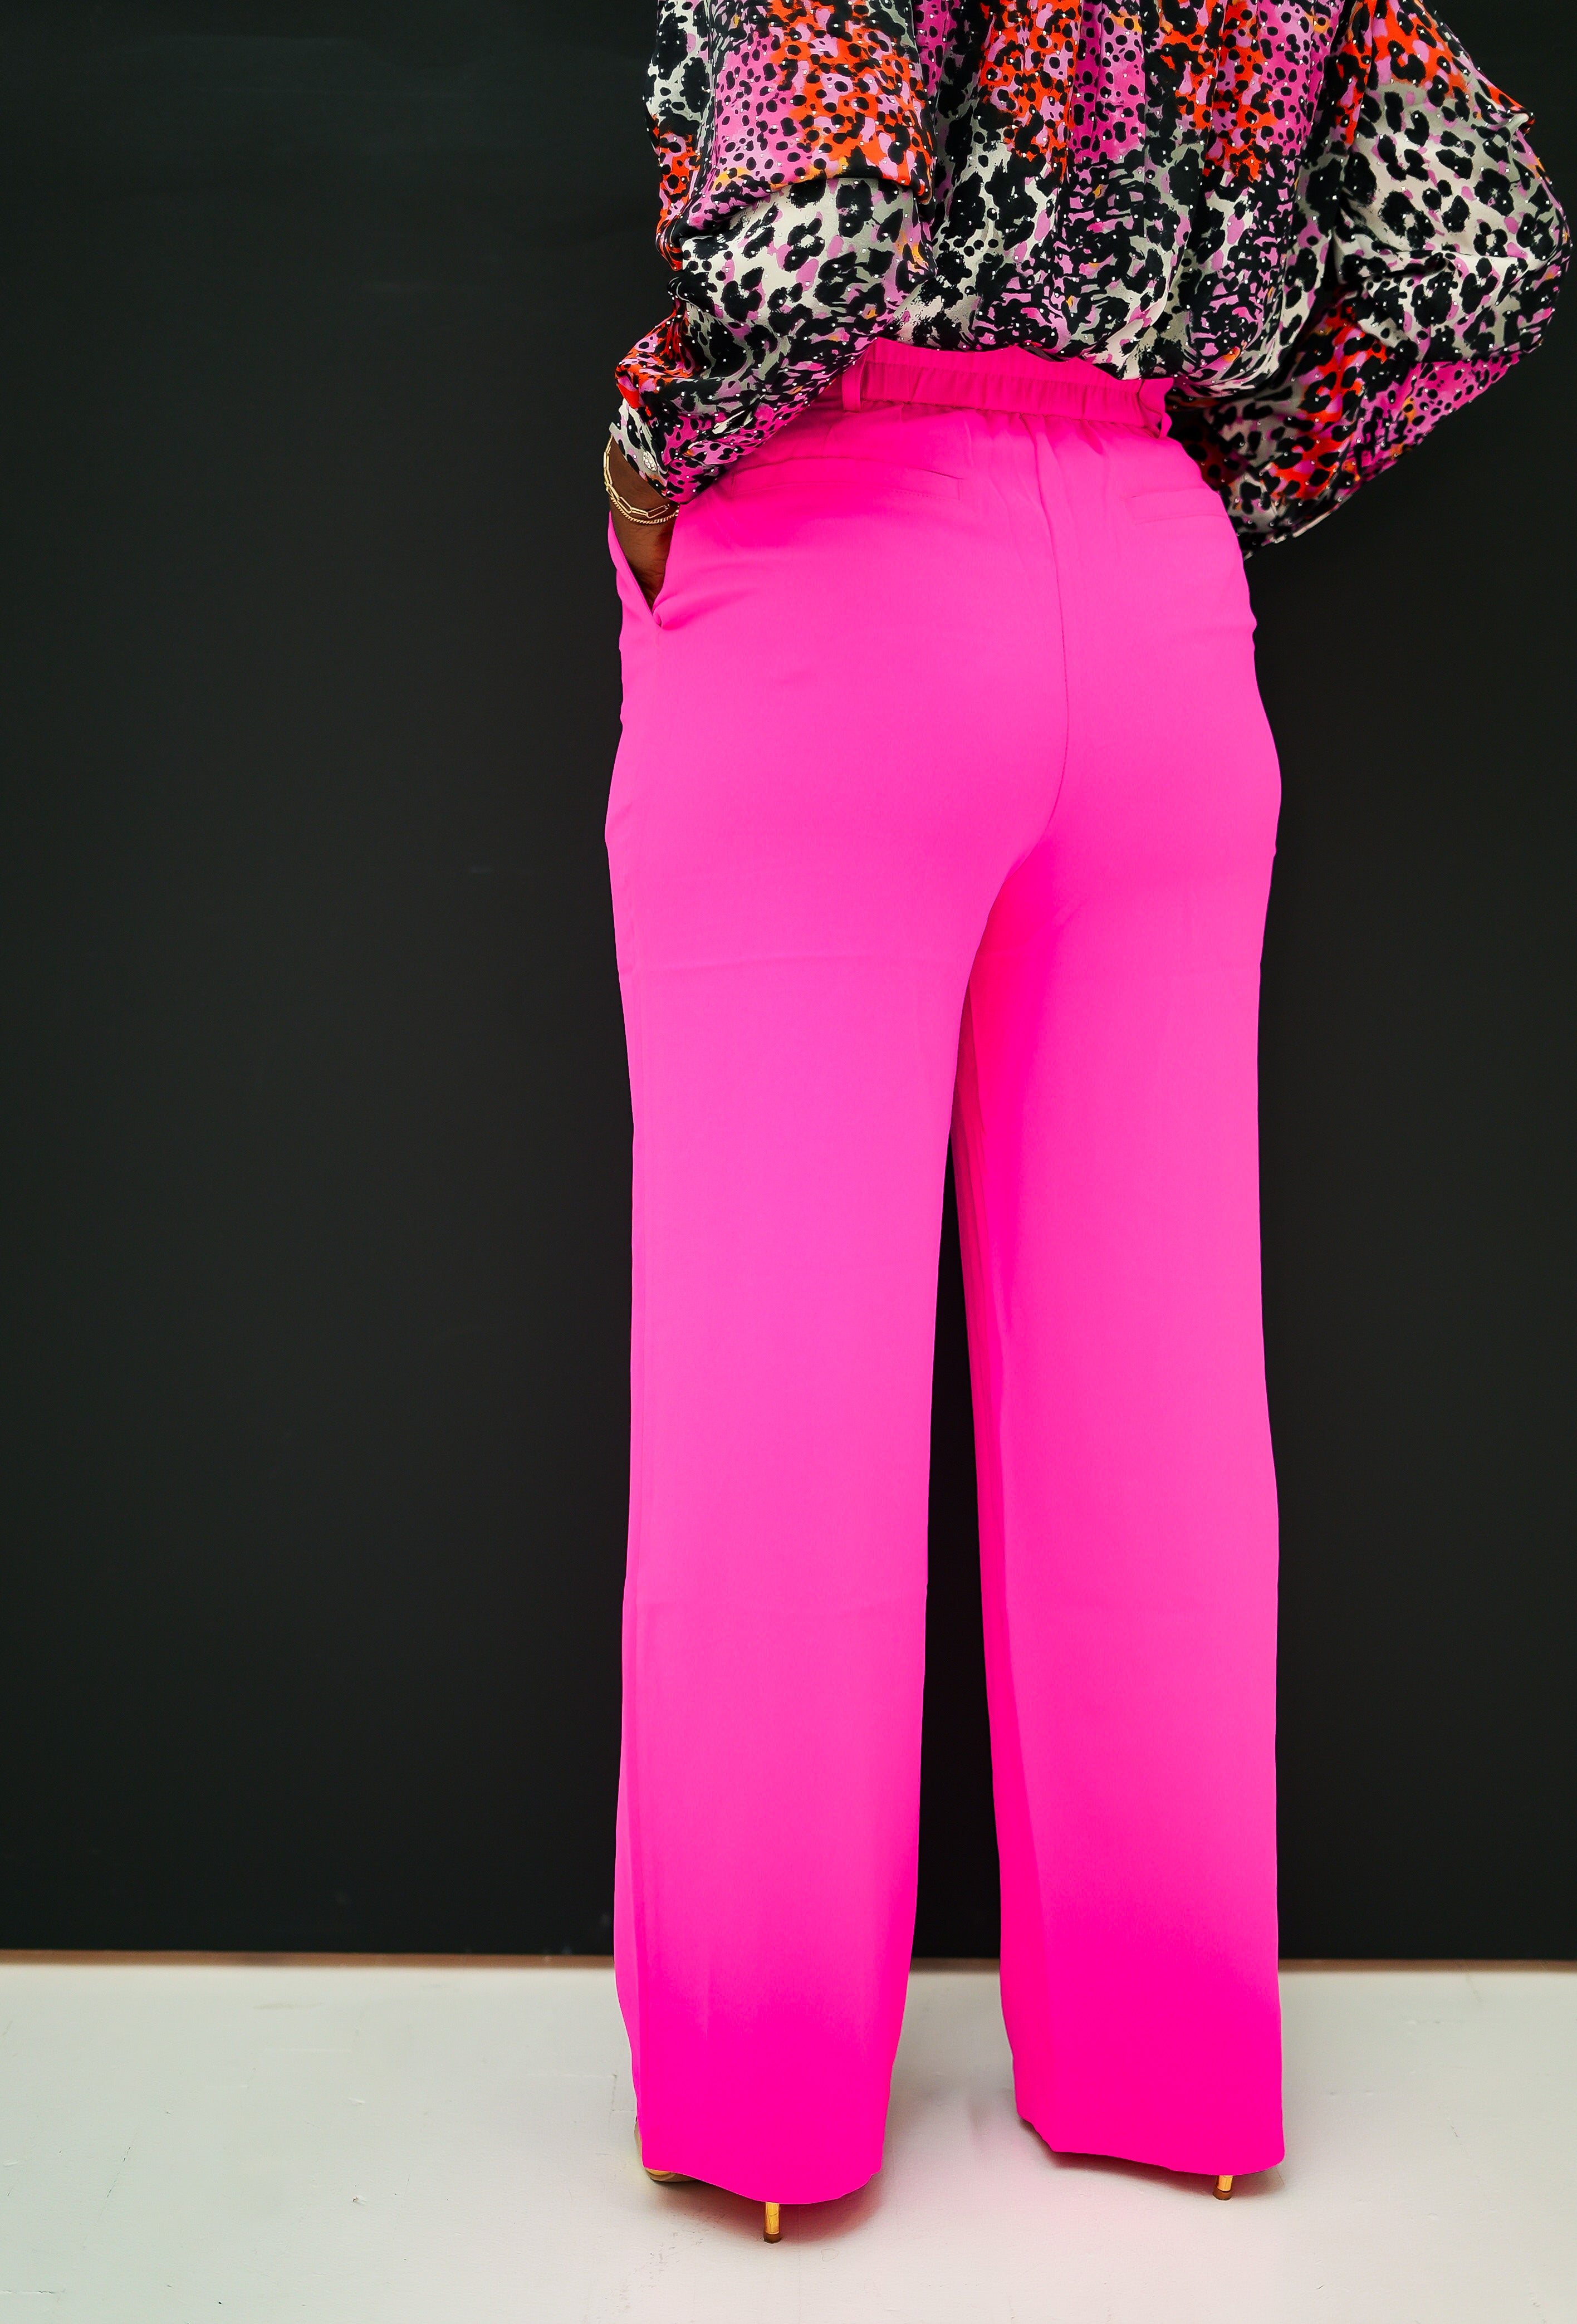 The ultra pink trouser